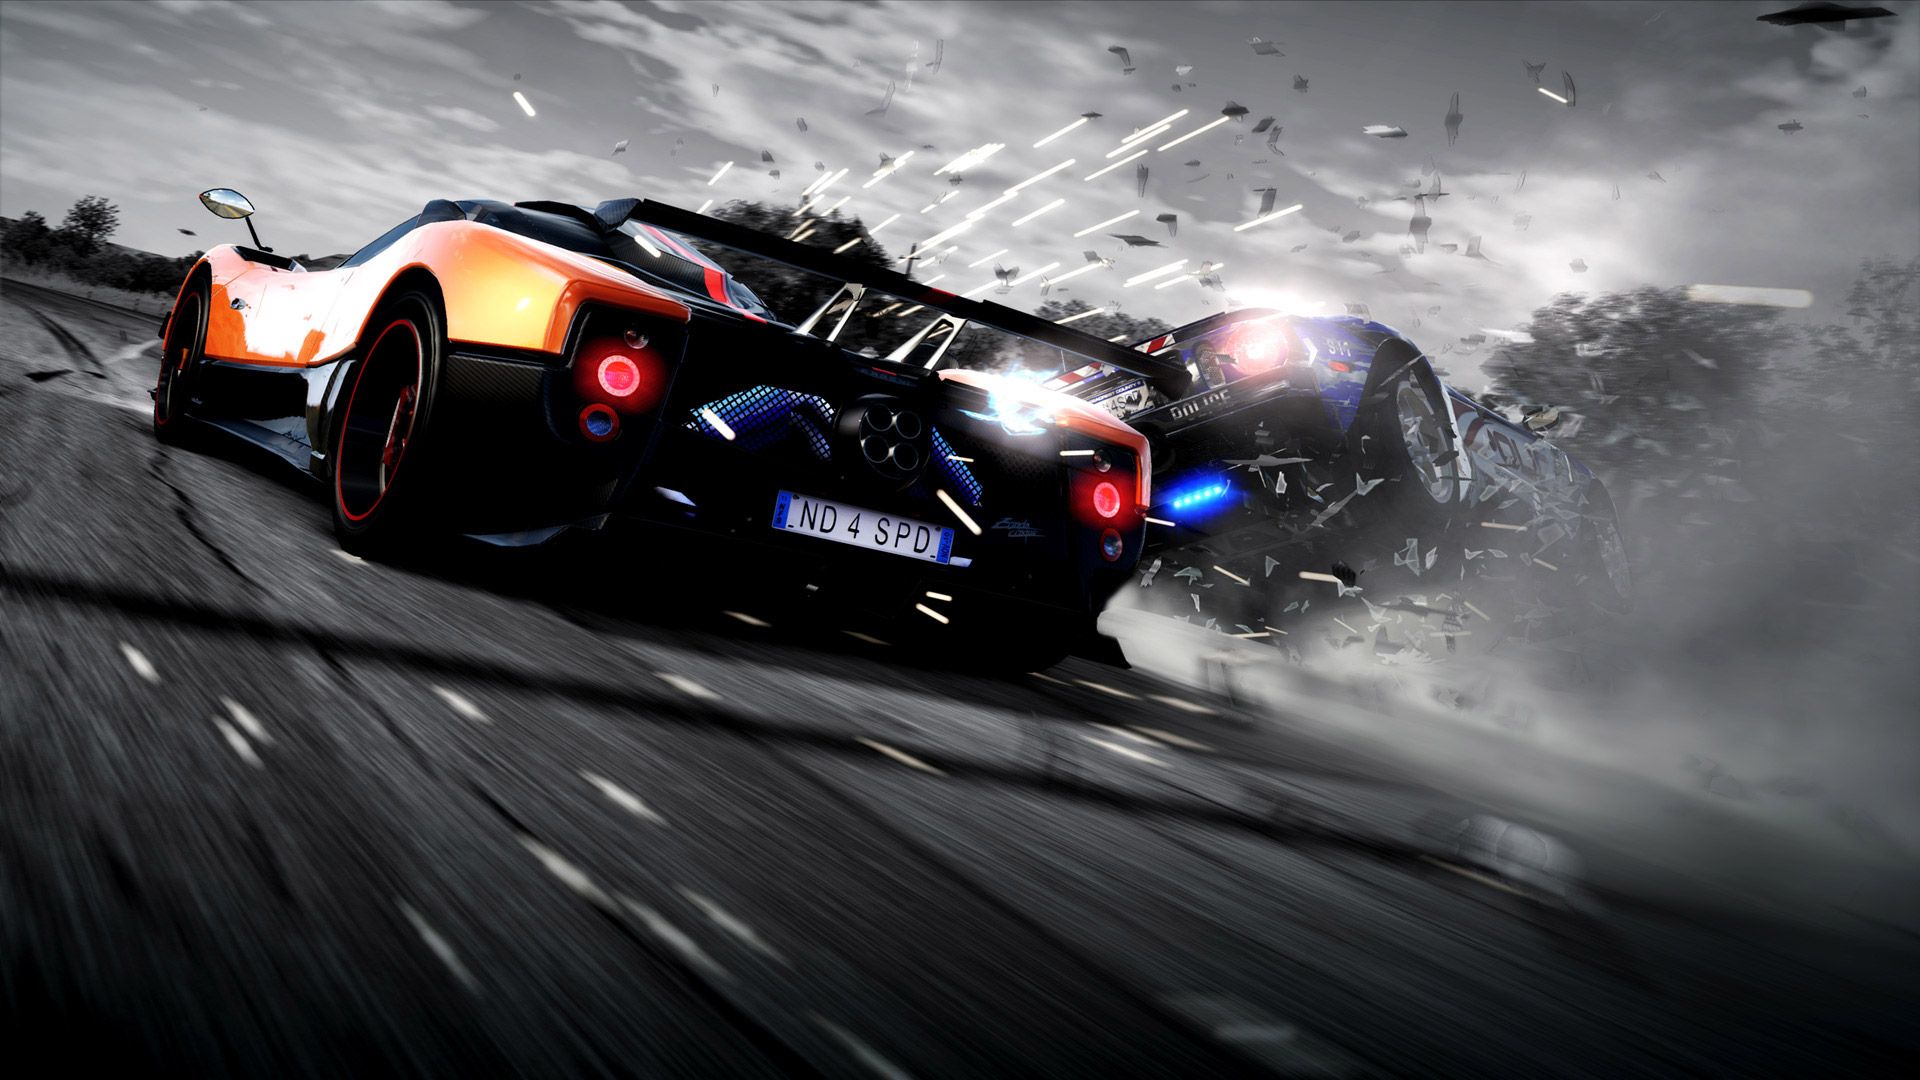 Need for Speed: Hot Pursuit Wallpaper in 1920x1080